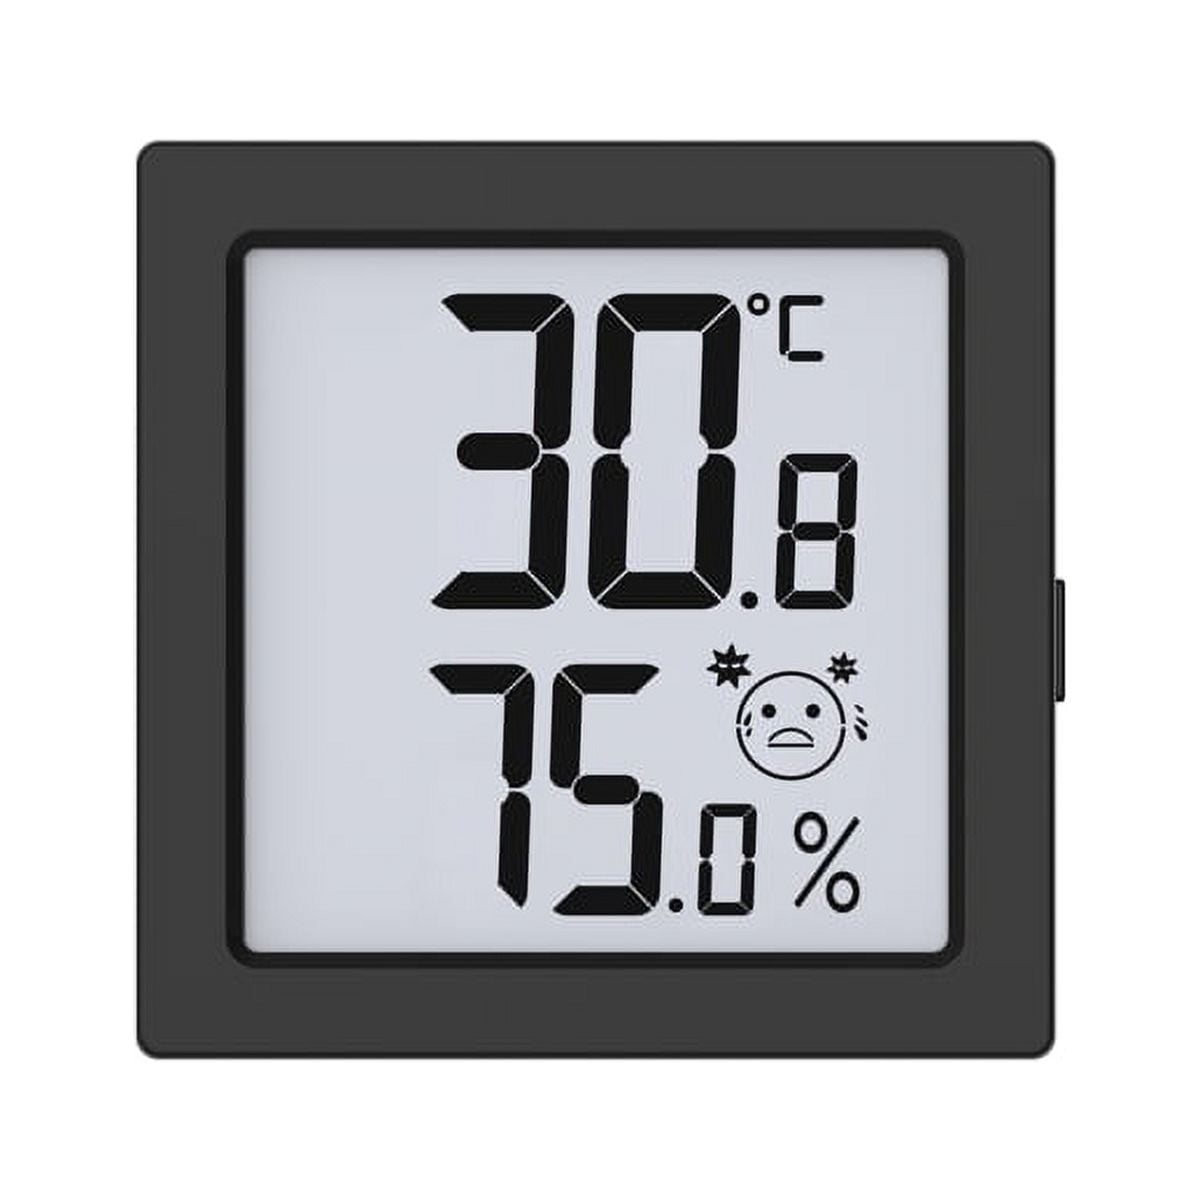 Professional Digital Hygrometer Indoor Thermometer Room Humidity Gauge &  Pro Accuracy Calibration, Household Sundries